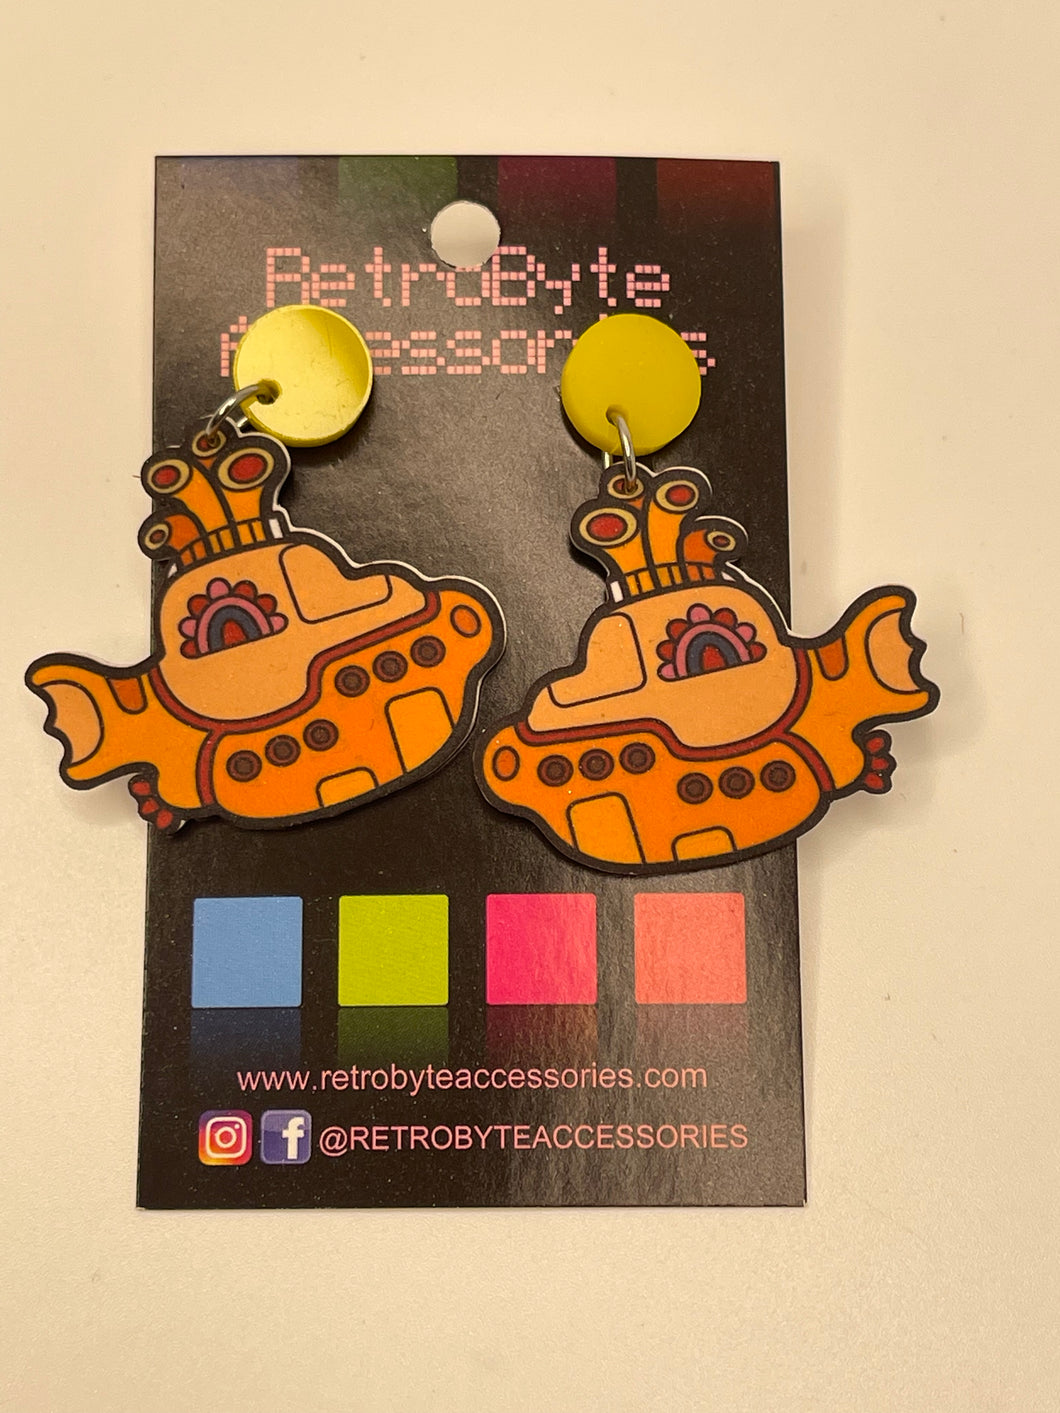 Yellow Submarine Earrings - Surgical steel